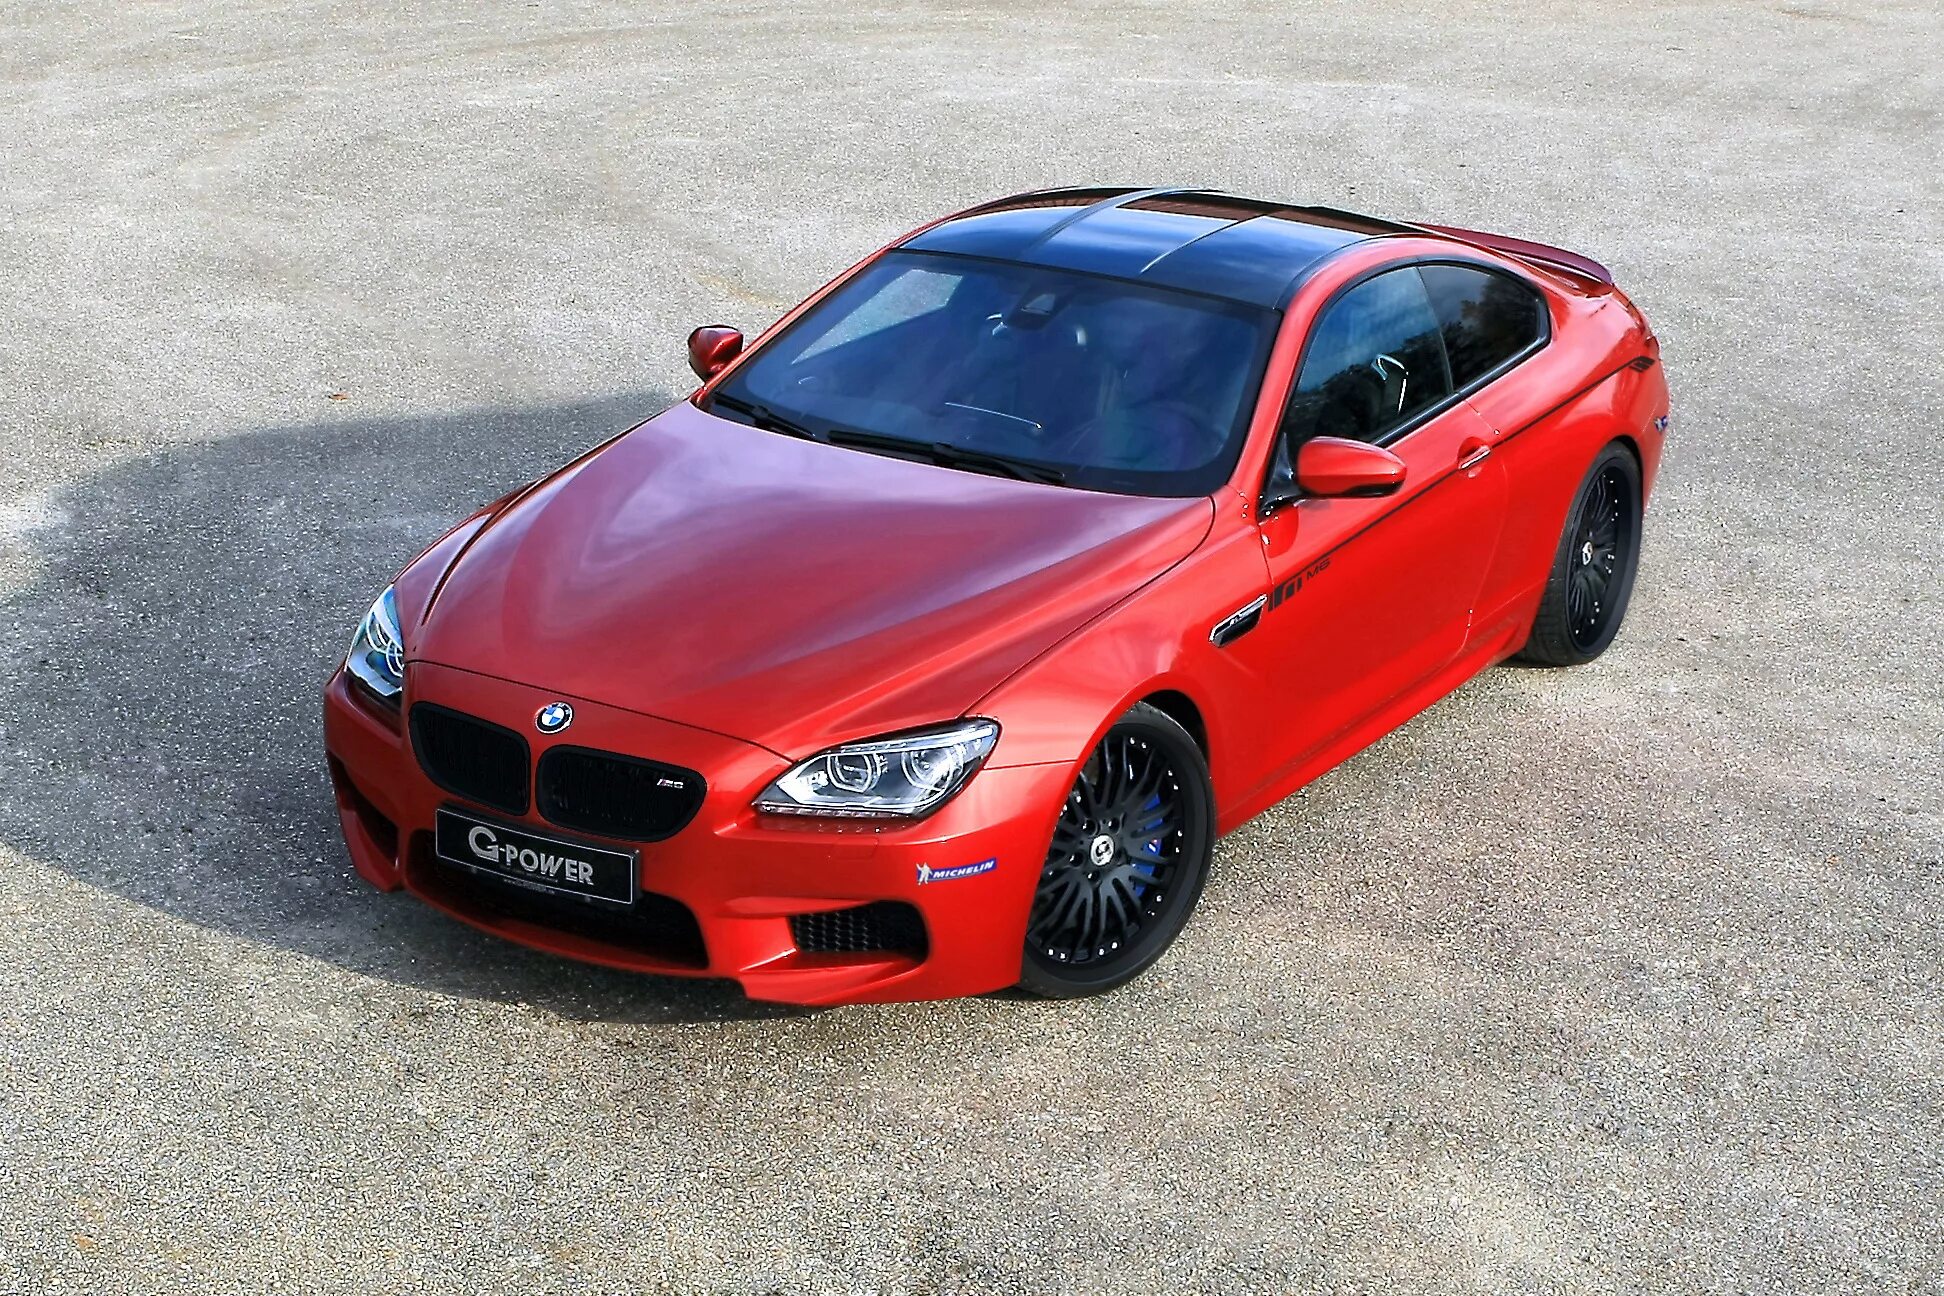 Bmw 6 m. BMW m6 f13. BMW m6 f13 Coupe. BMW m6 Coupe 2013. BMW m6 f13 Red.